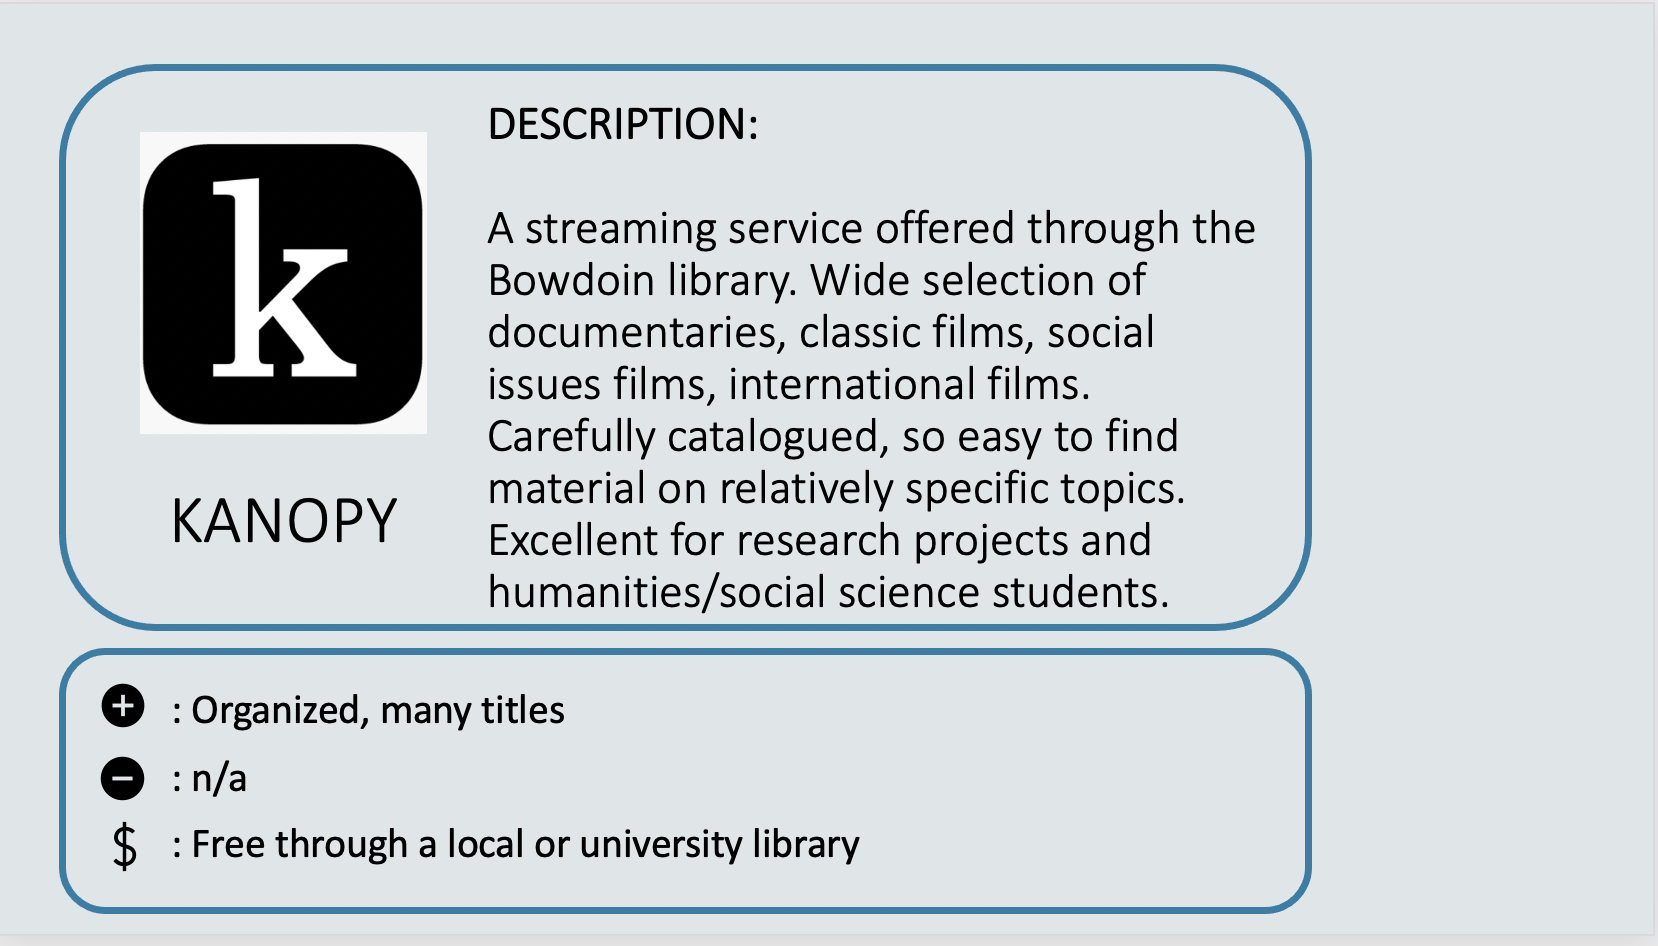 KANOPY - A streaming service offered through the Bowdoin library. Wide selection of documentaries, classic films, social issues films, international films. Carefully catalogued, so easy to find material on relatively specific topics. Excellent for research projects and humanities/social science students. Positive: Organized, many titles. Negative: N/A. Cost: Free through a local or university library.